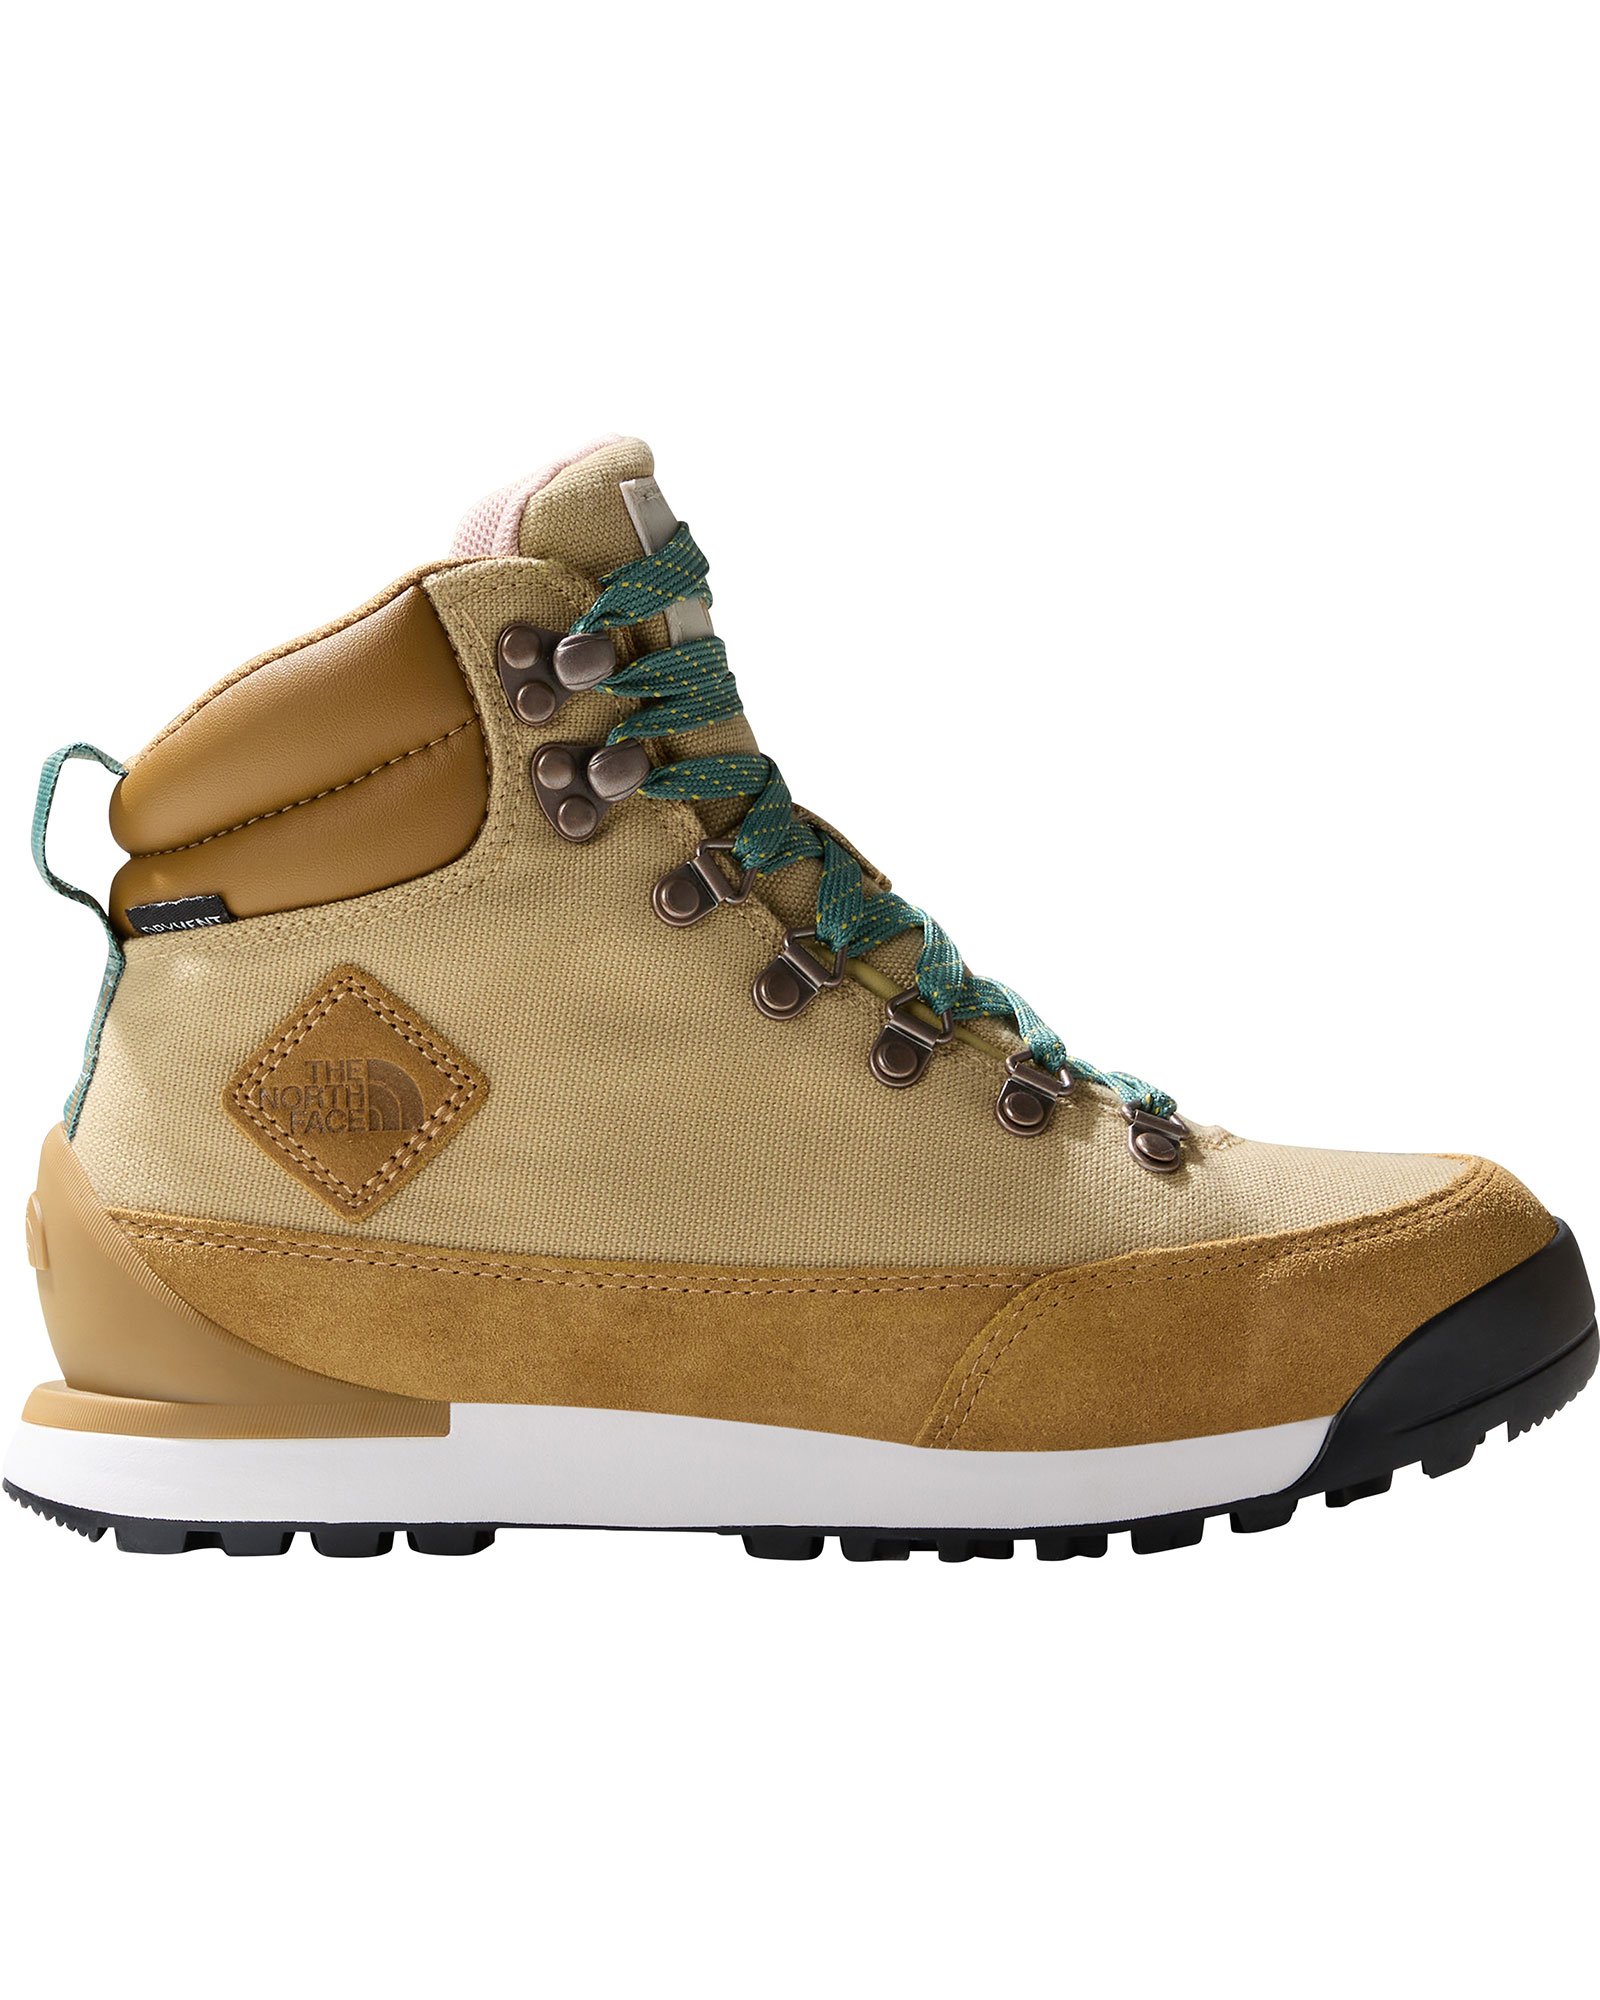 The North Face Back to Berkeley IV Textile Waterproof Women’s Boots - Khaki Stone/Utility Brown UK 7